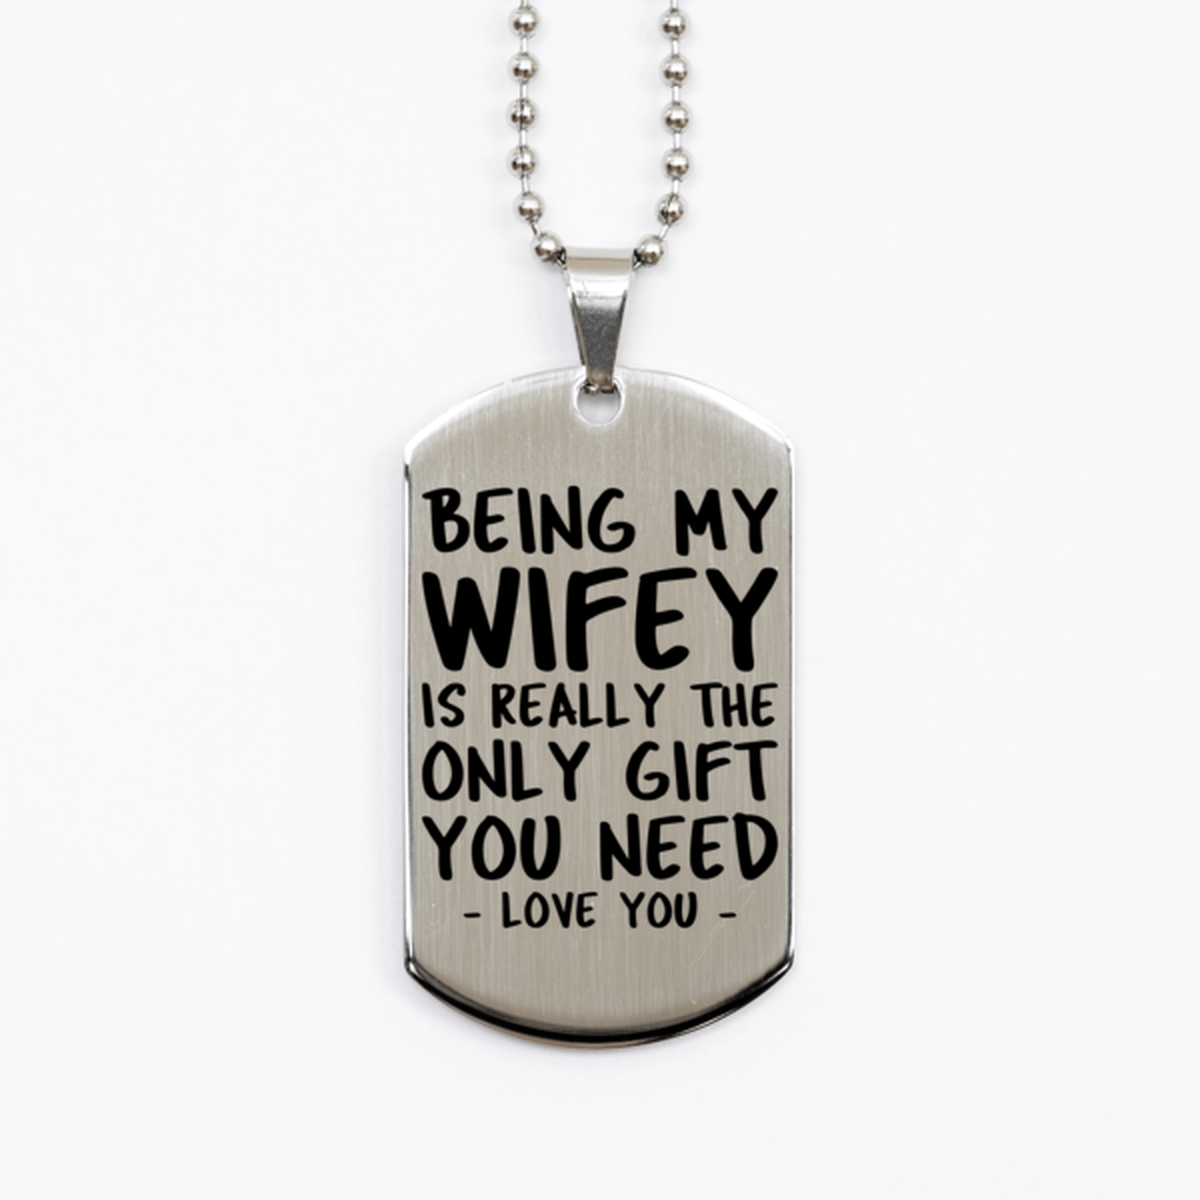 Funny Wifey Silver Dog Tag Necklace, Being My Wifey Is Really the Only Gift You Need, Best Birthday Gifts for Wifey